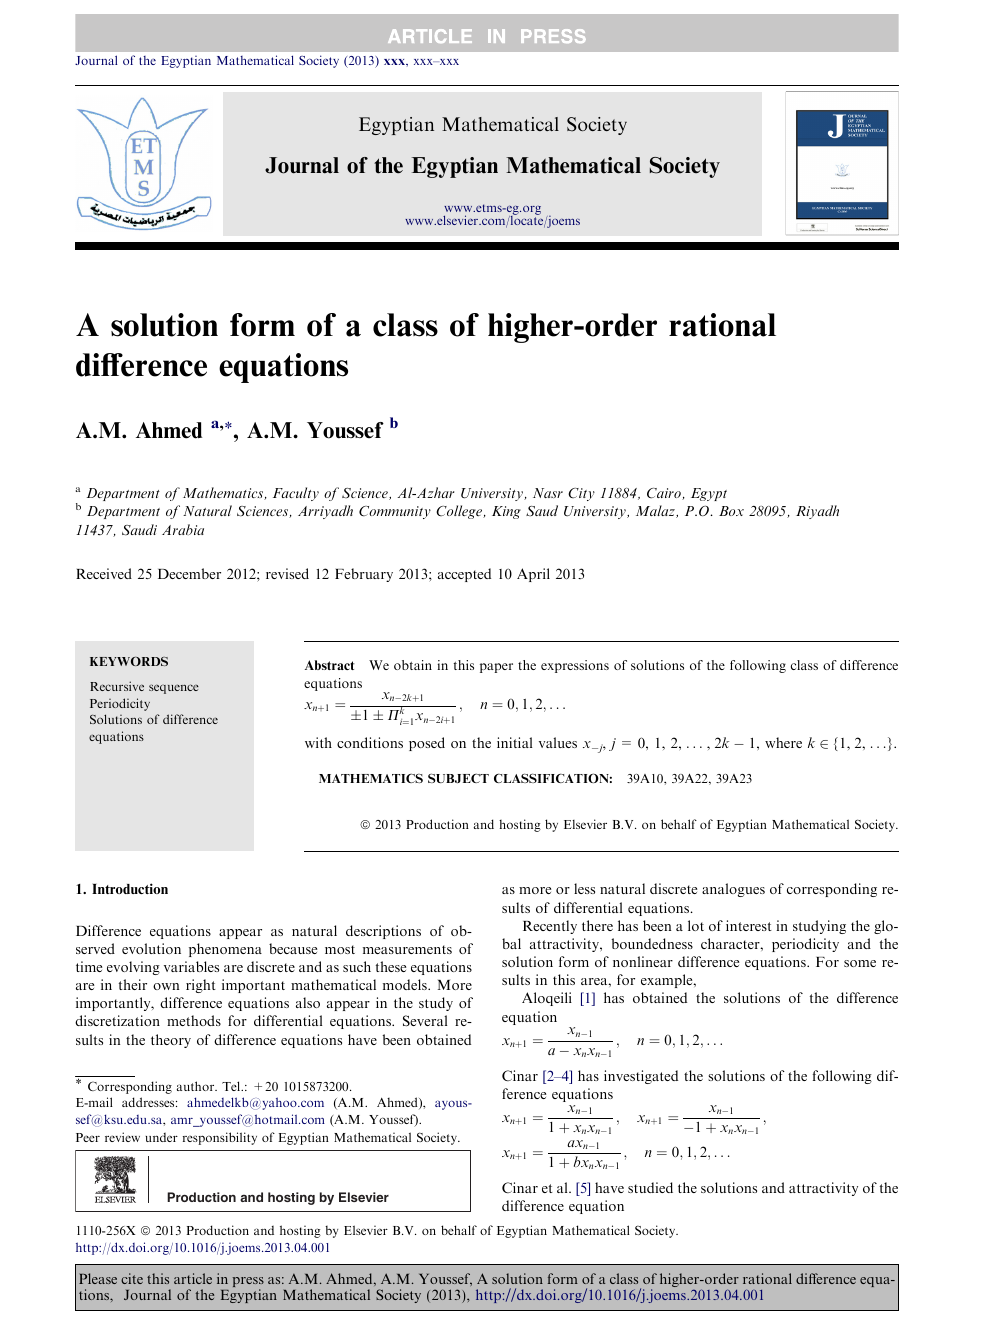 A Solution Form Of A Class Of Higher Order Rational Difference Equations Topic Of Research Paper In Mathematics Download Scholarly Article Pdf And Read For Free On Cyberleninka Open Science Hub